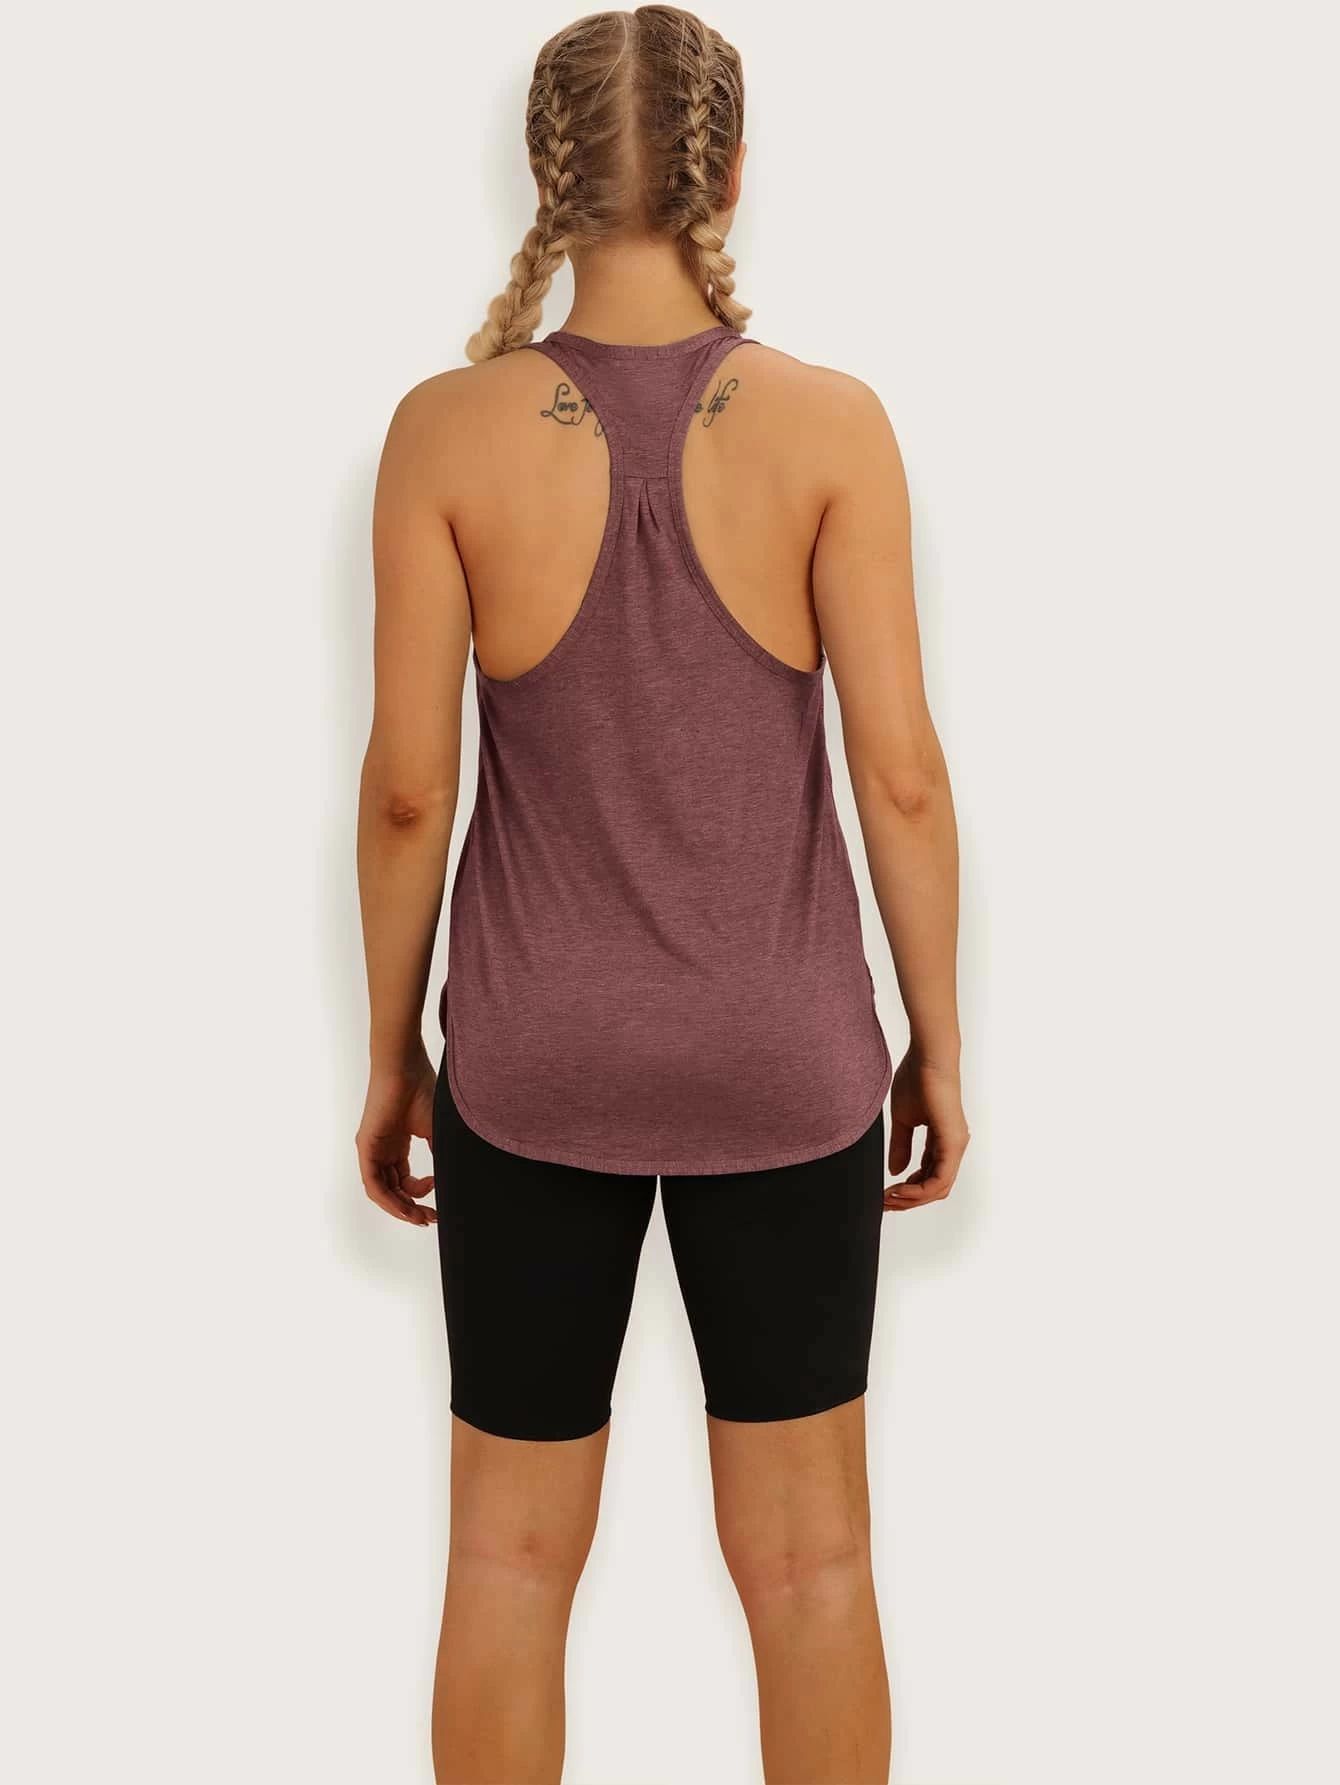 Icyzone Racer Back Solid Sports Tank Top | SHEIN